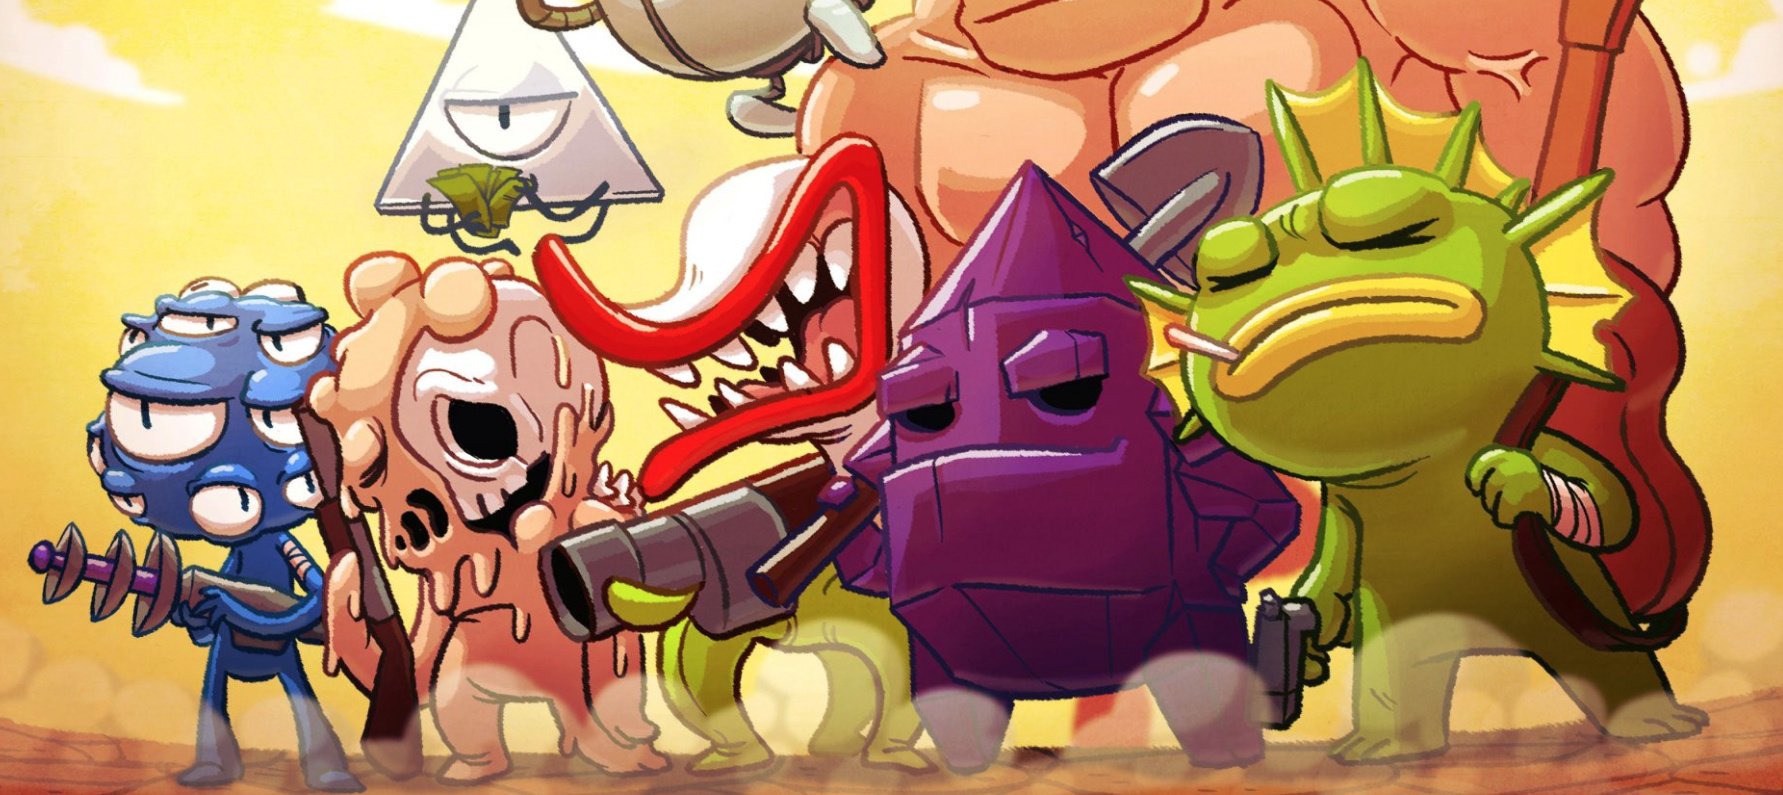 nuclear throne ps5 download